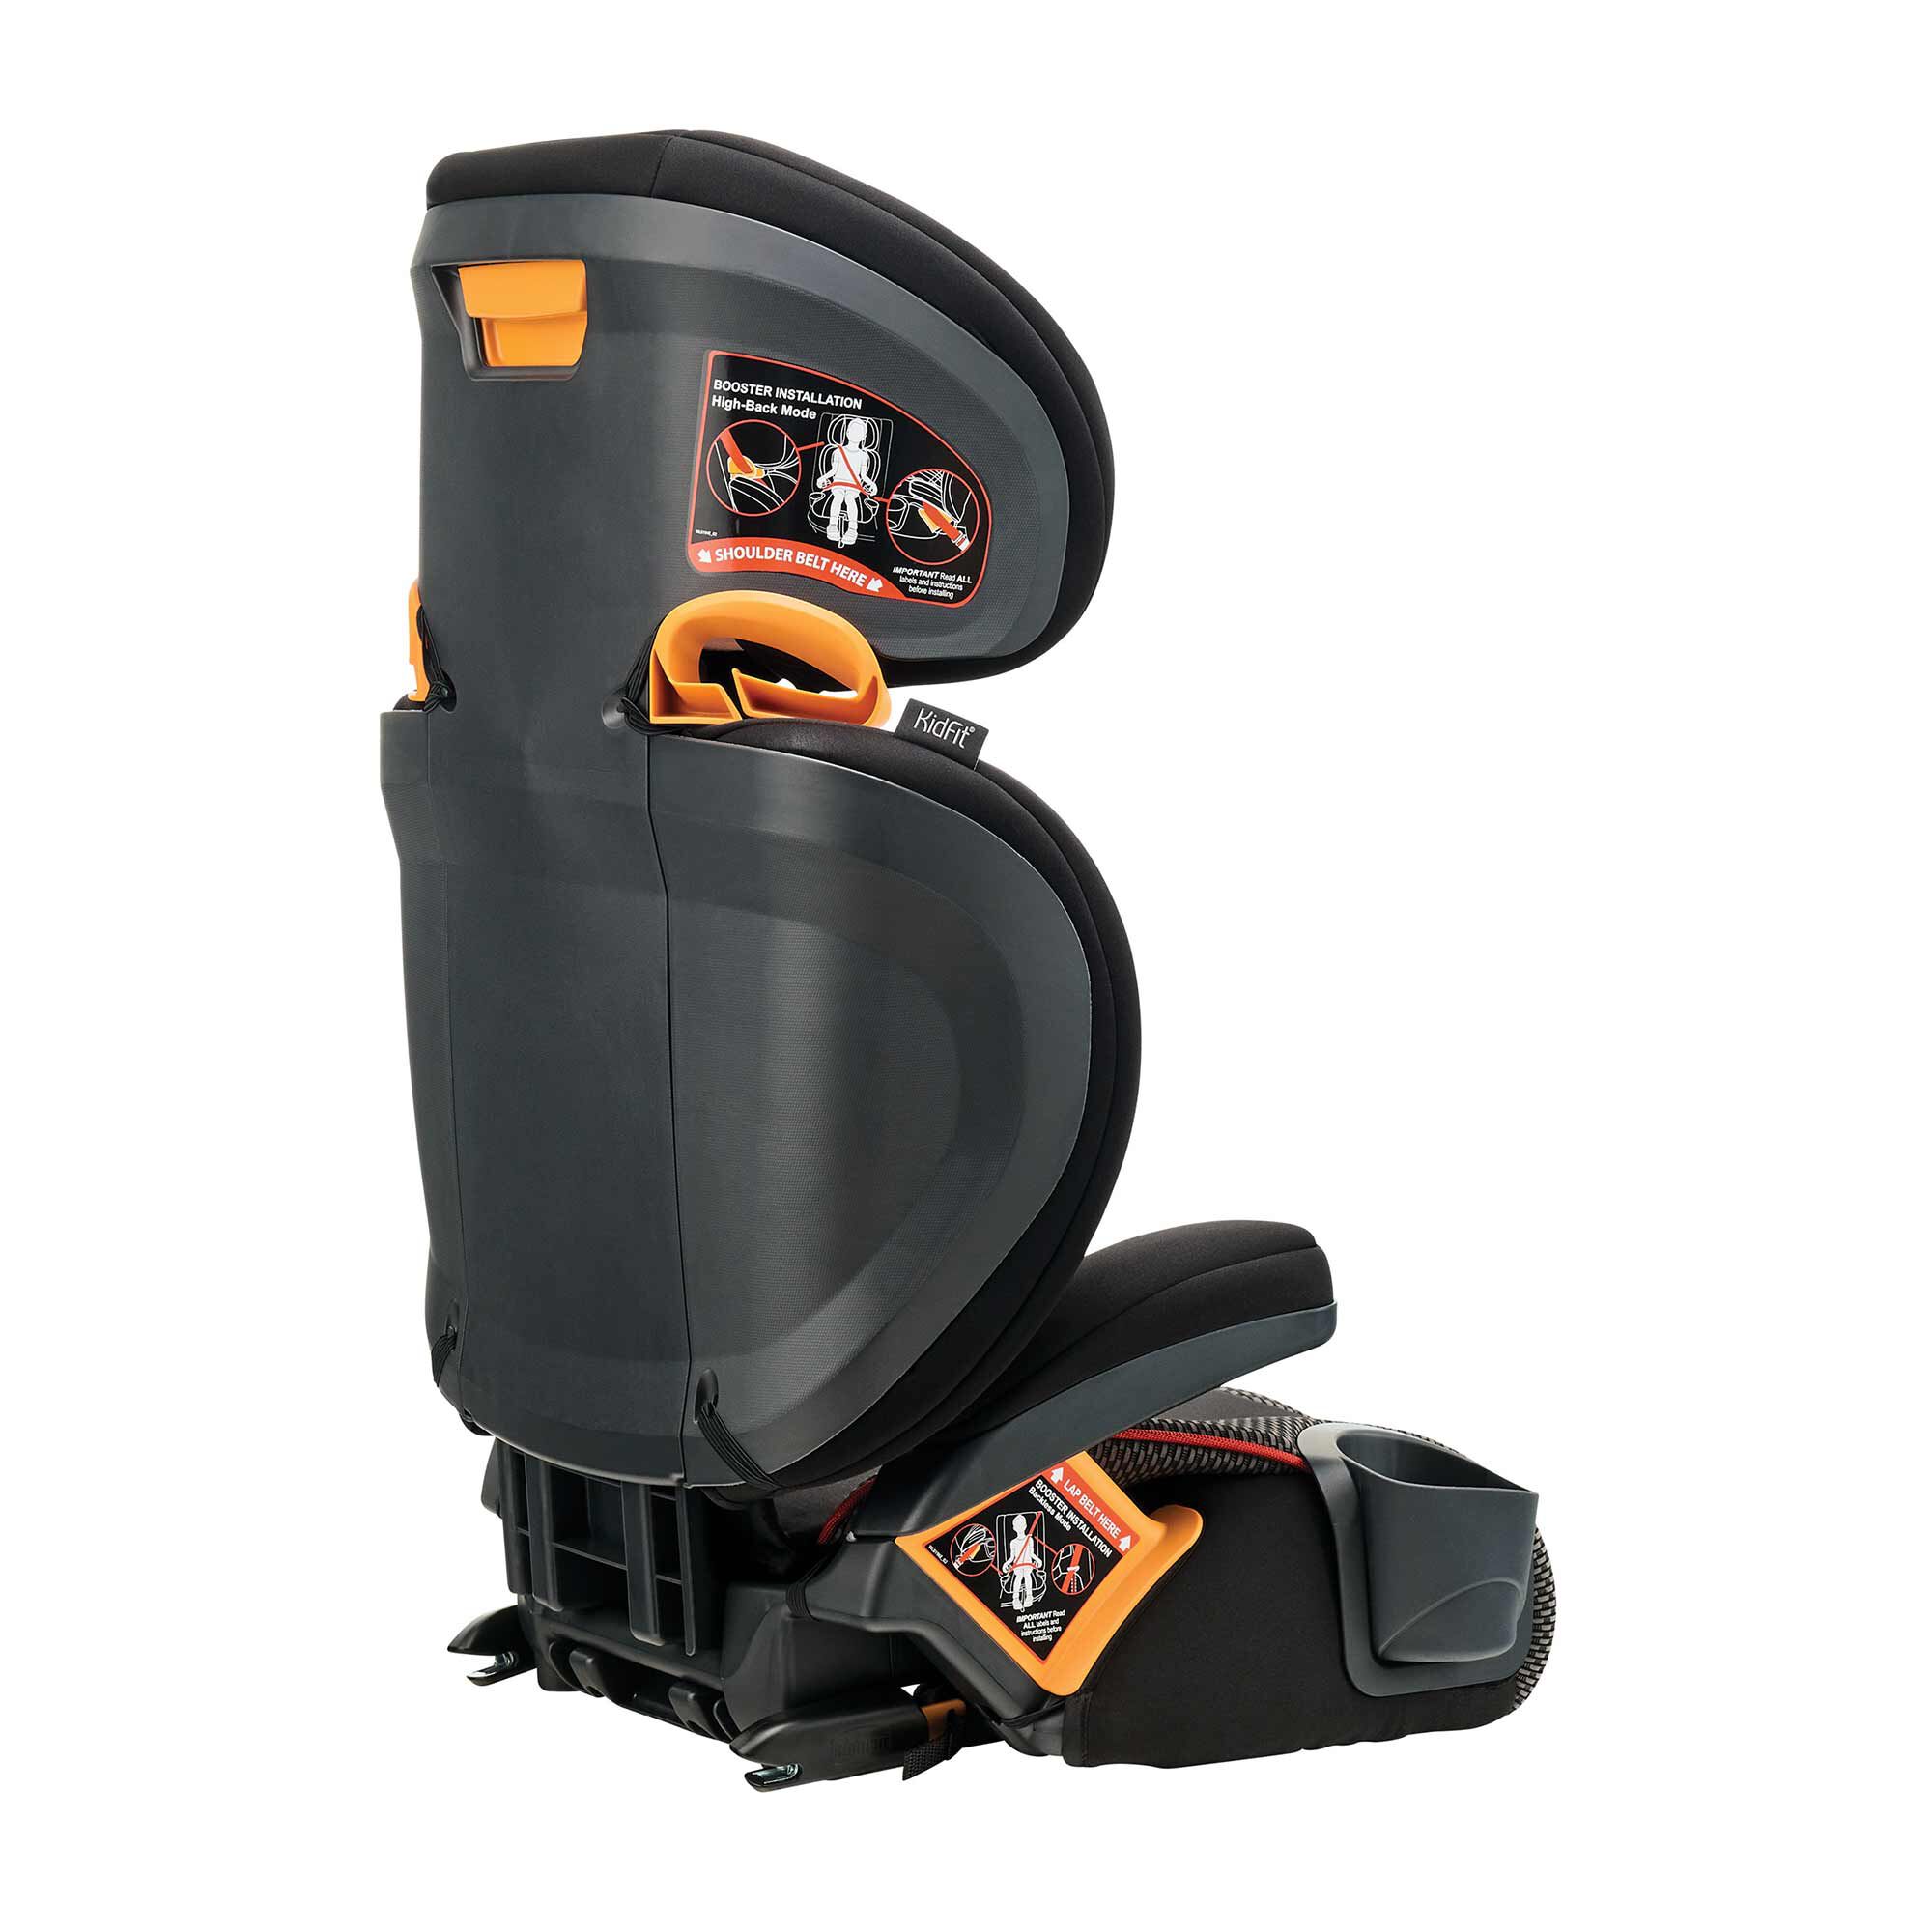 Chicco KidFit 2-in-1 Belt Atmosphere Car Positioning Booster - Seat